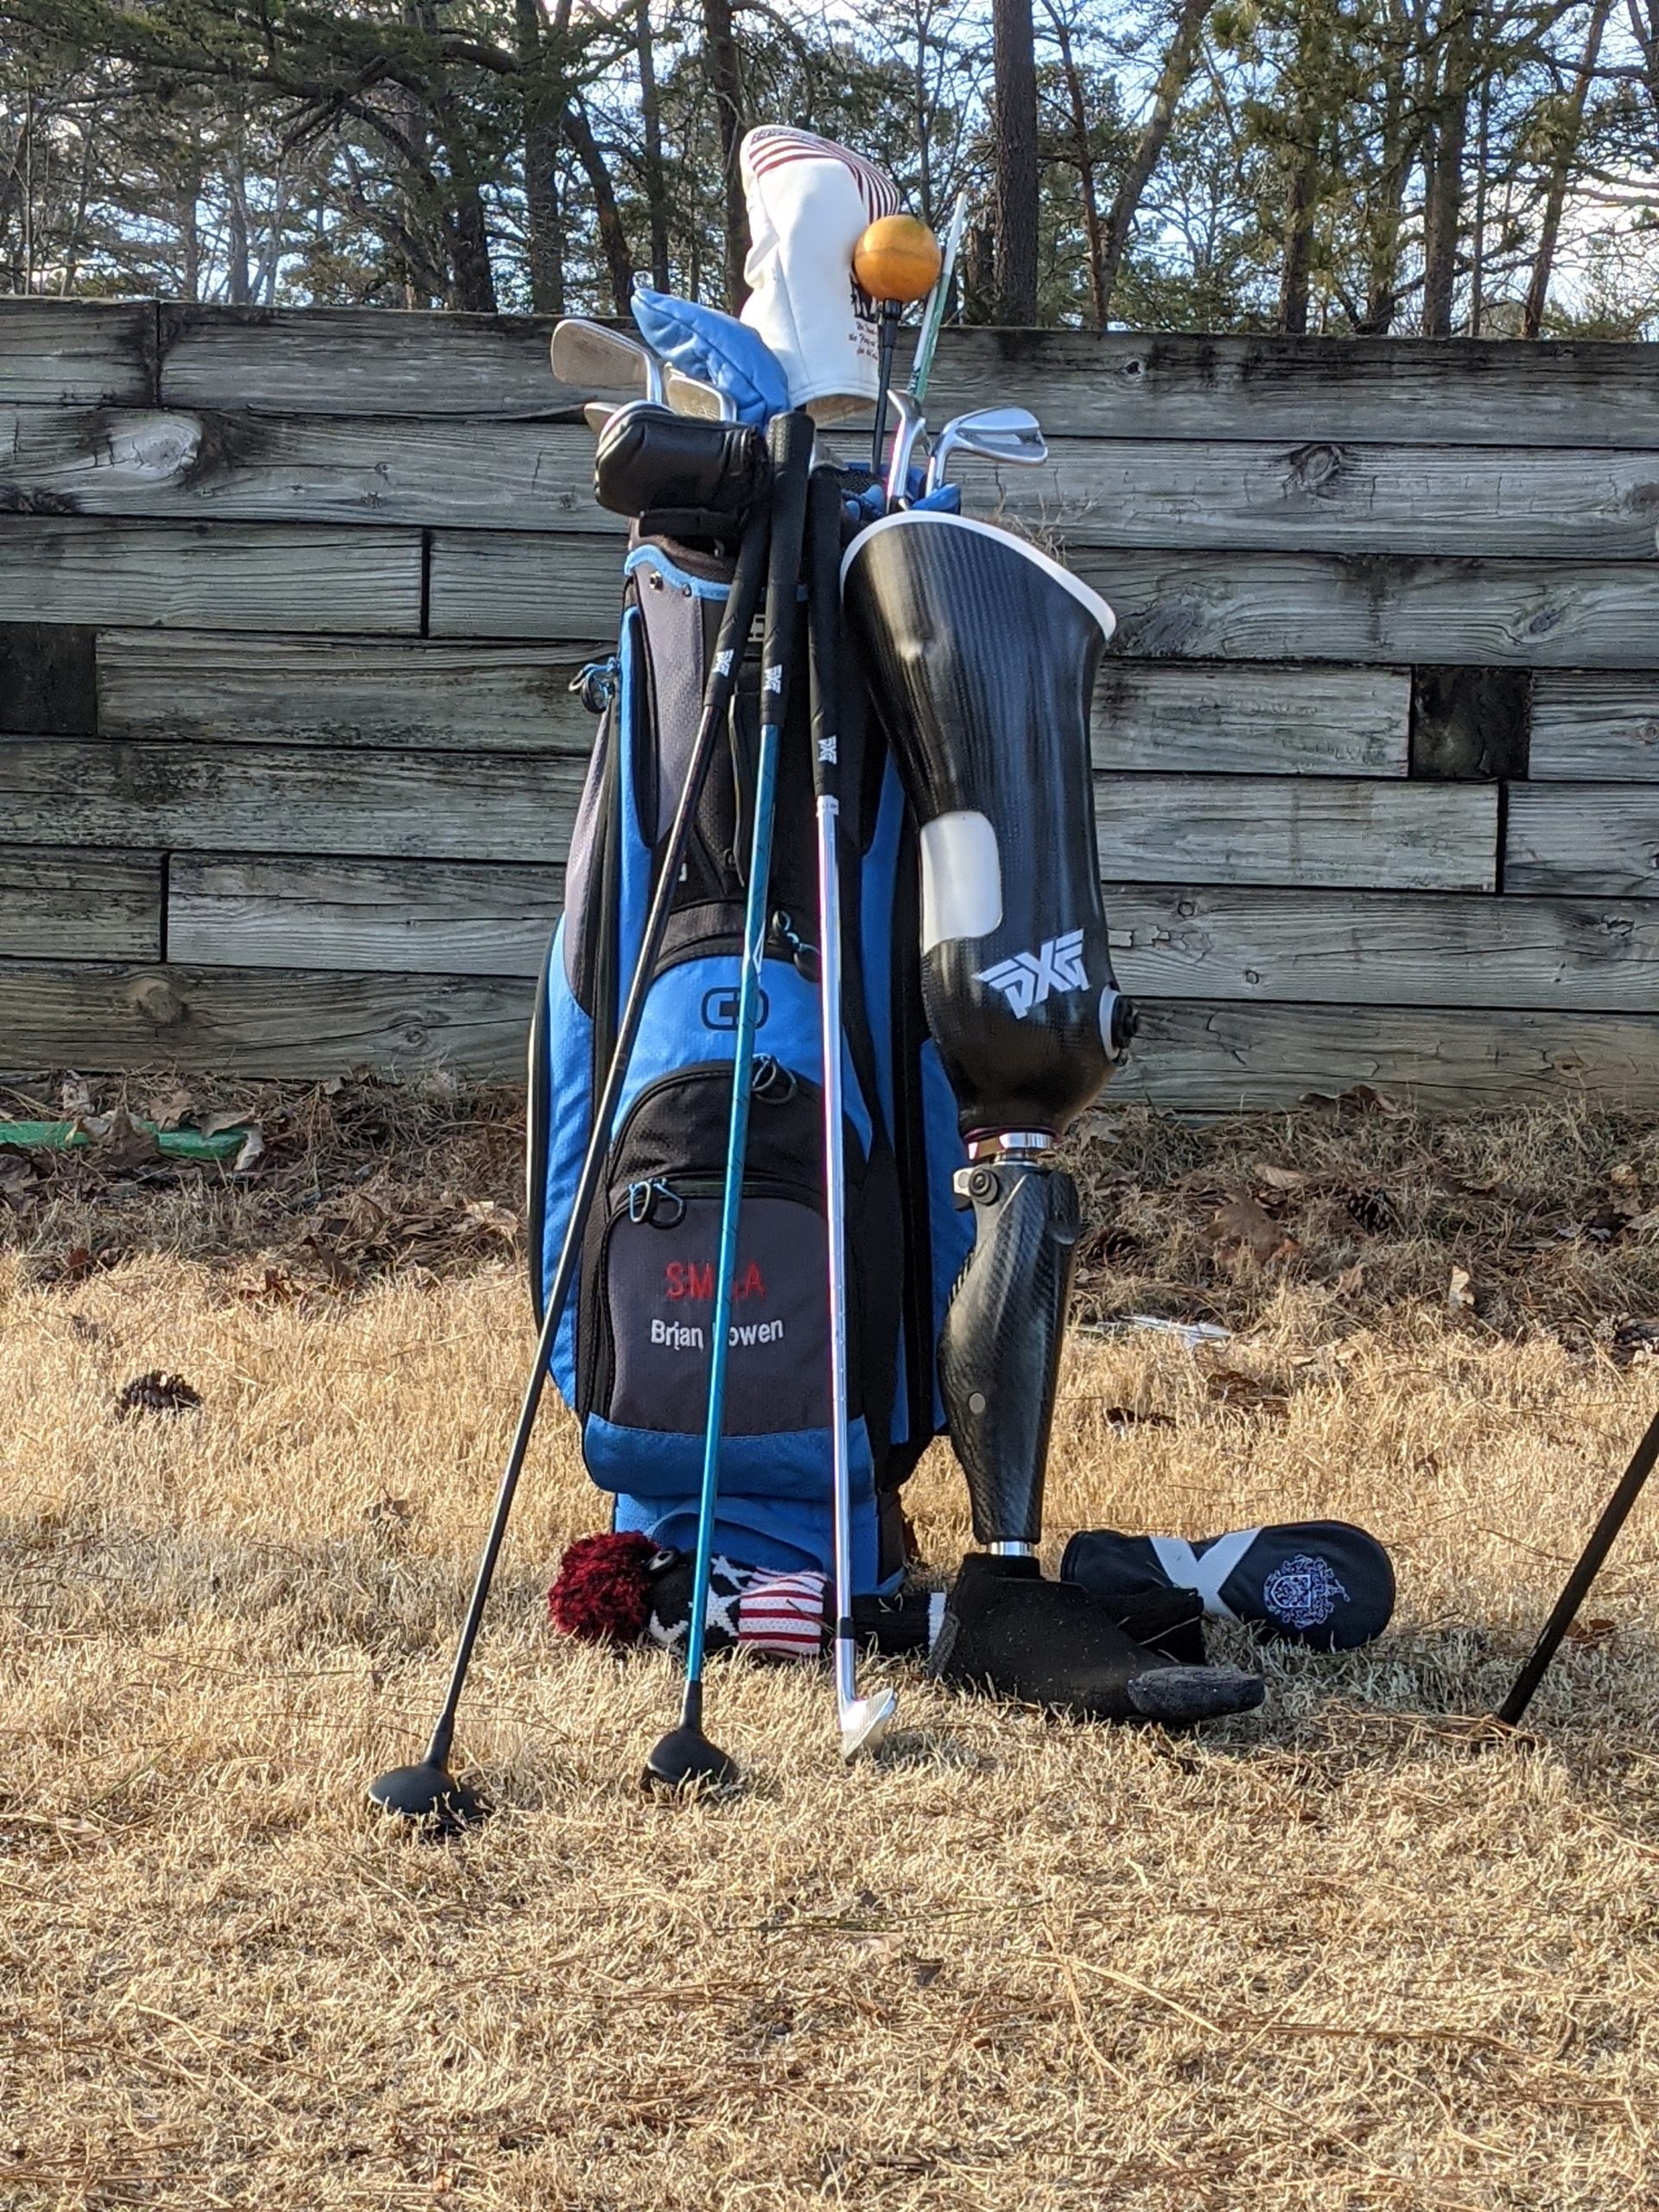 Blue golf bag with leg prosthetic leaning leaning upright on the bag